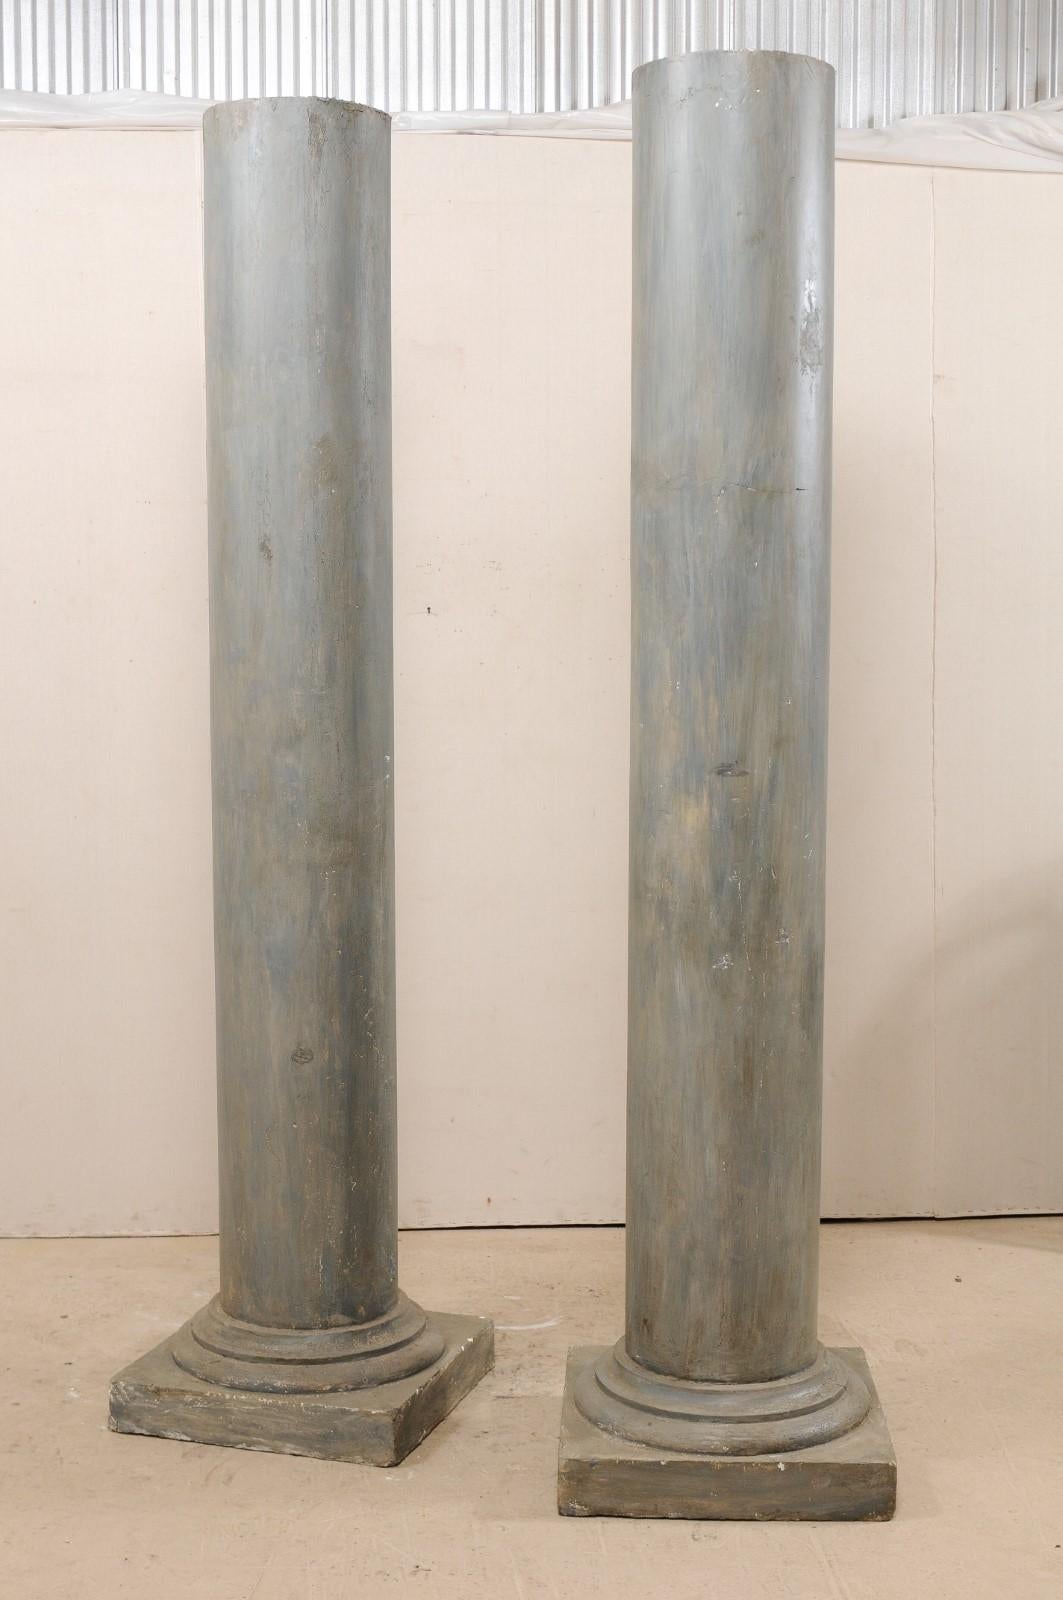 A tall pair of French painted plaster columns from the mid-20th century. These vintage Doric style columns from France feature rounded, straight, smooth shafts, and raised upon square bases. The columns have been painted in various shades of blue